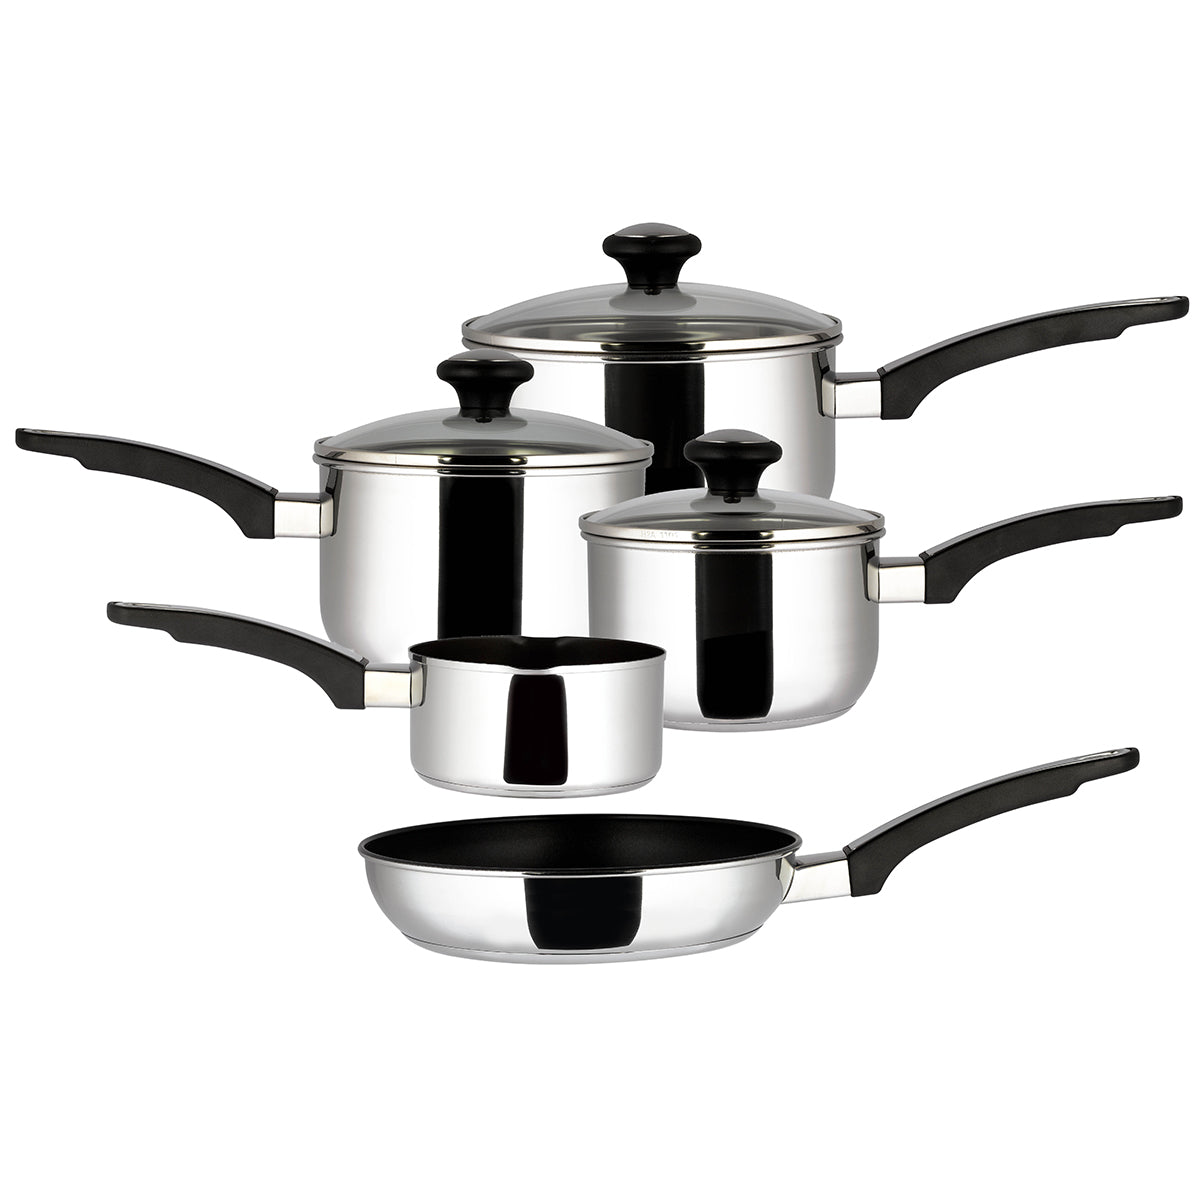 An image of 5 Piece Everyday Stainless Steel Pan Set